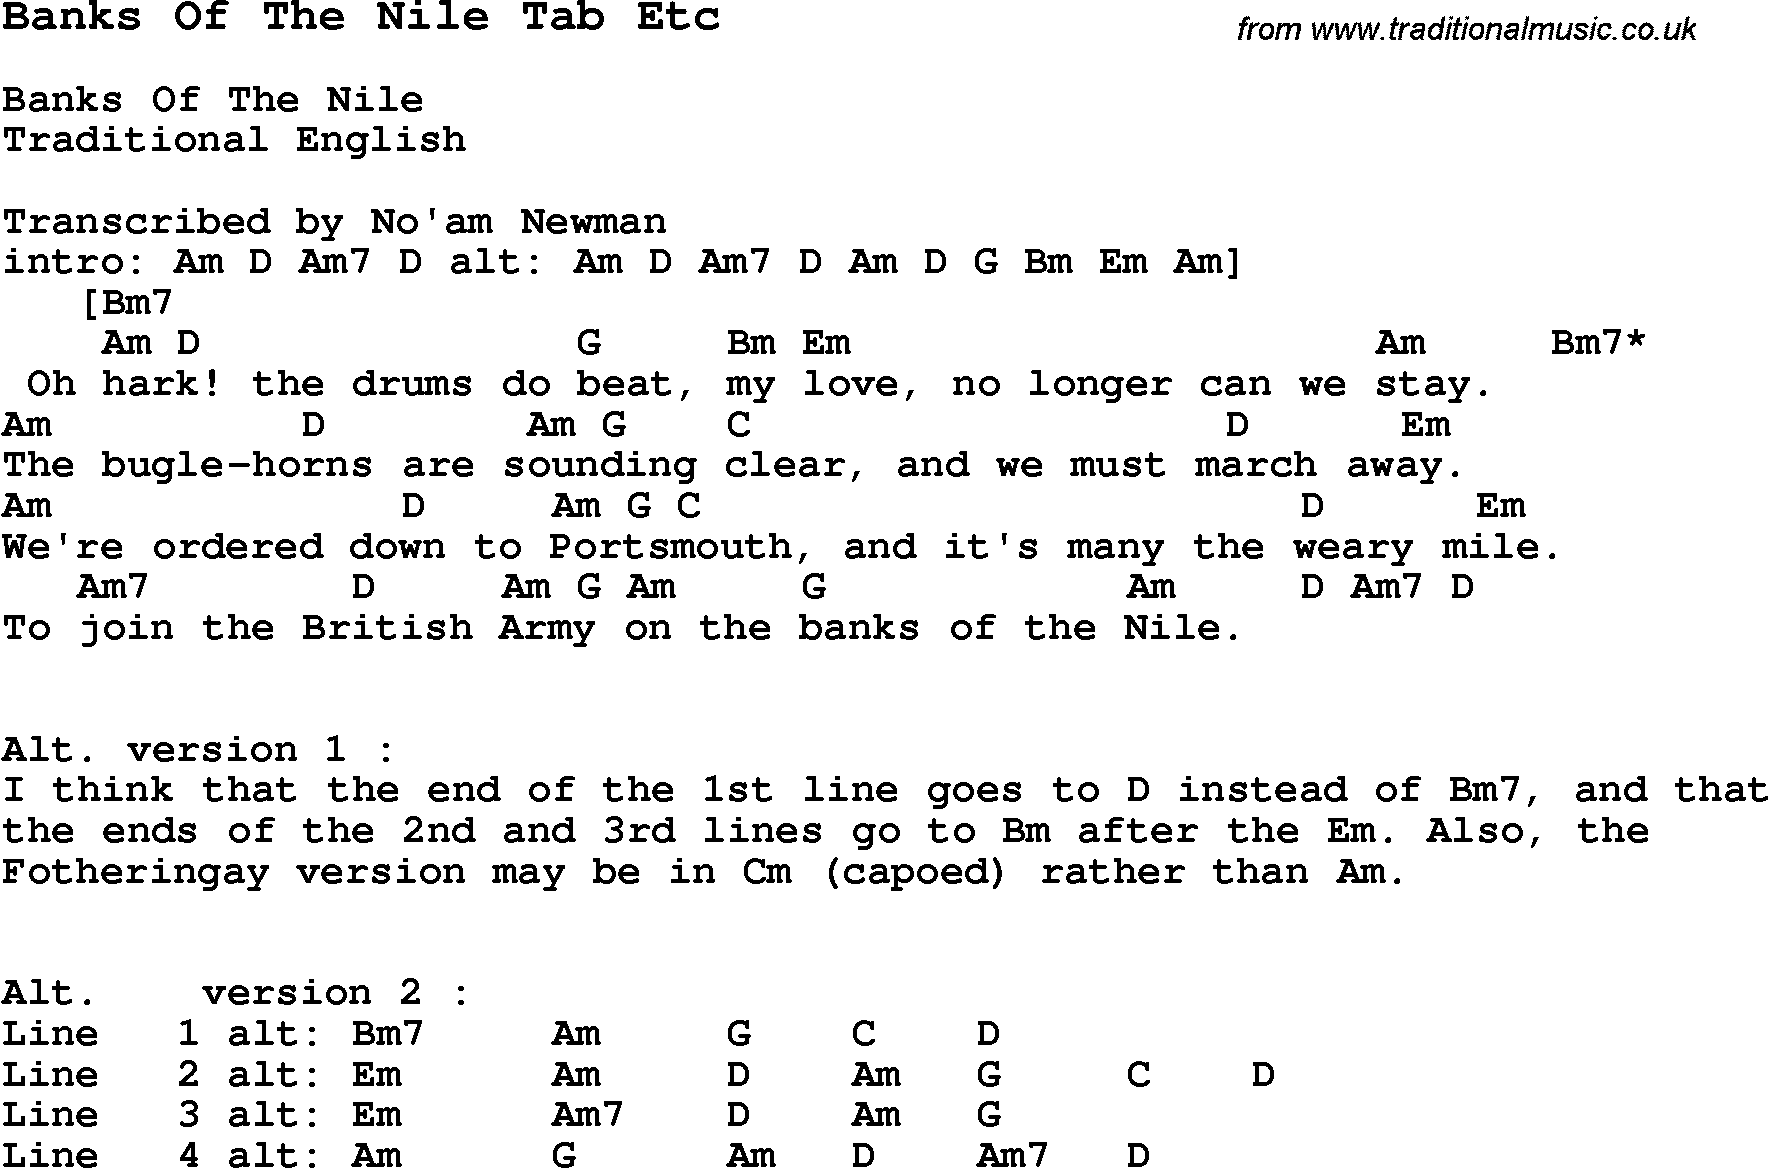 Traditional Song Banks Of The Nile Tab Etc with Chords, Tabs and Lyrics